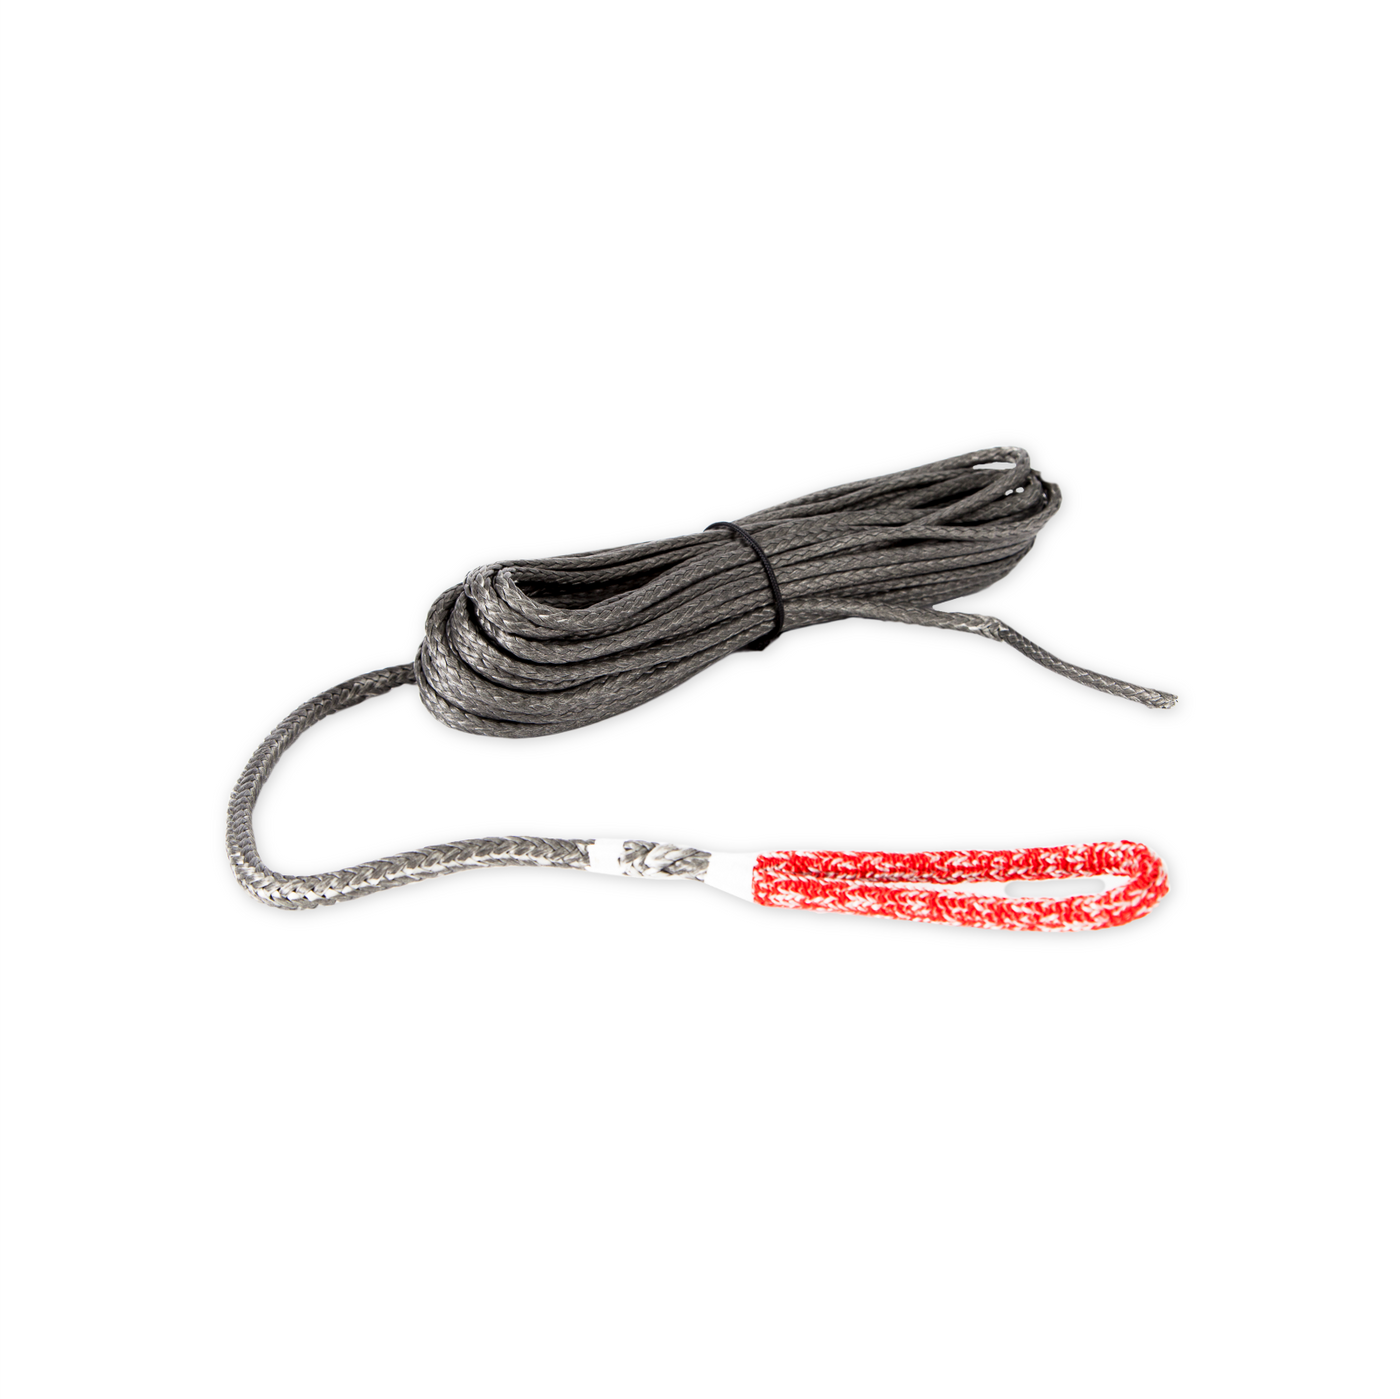 Dyneema winchlines for off-road vehicle winches